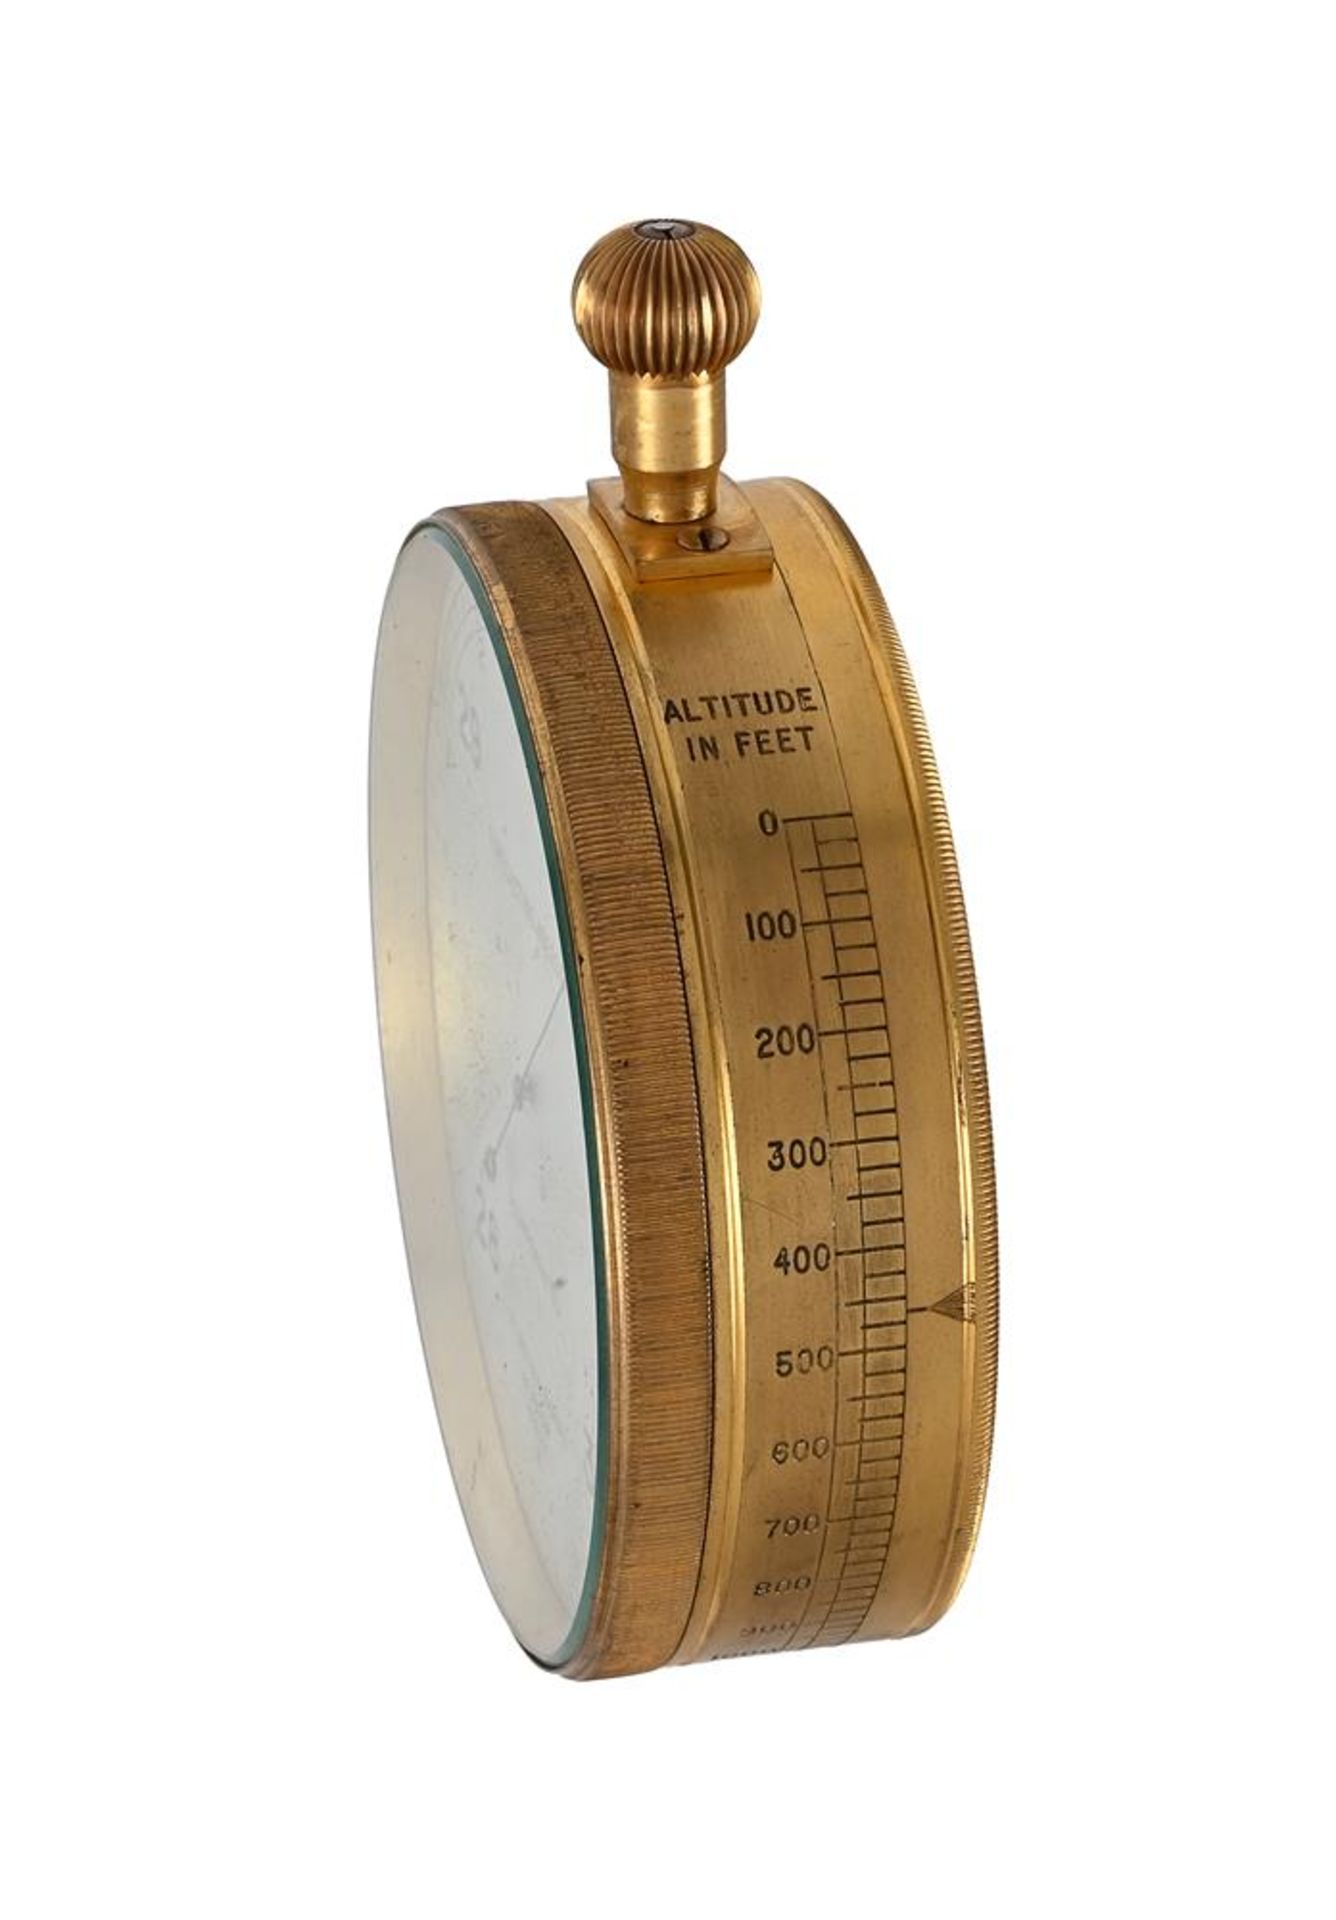 A CASED SET OF ANEROID FORECASTING BAROMETER AND LACQUERED BRASS WEATHER FORECASTING CALCULATOR - Image 6 of 7